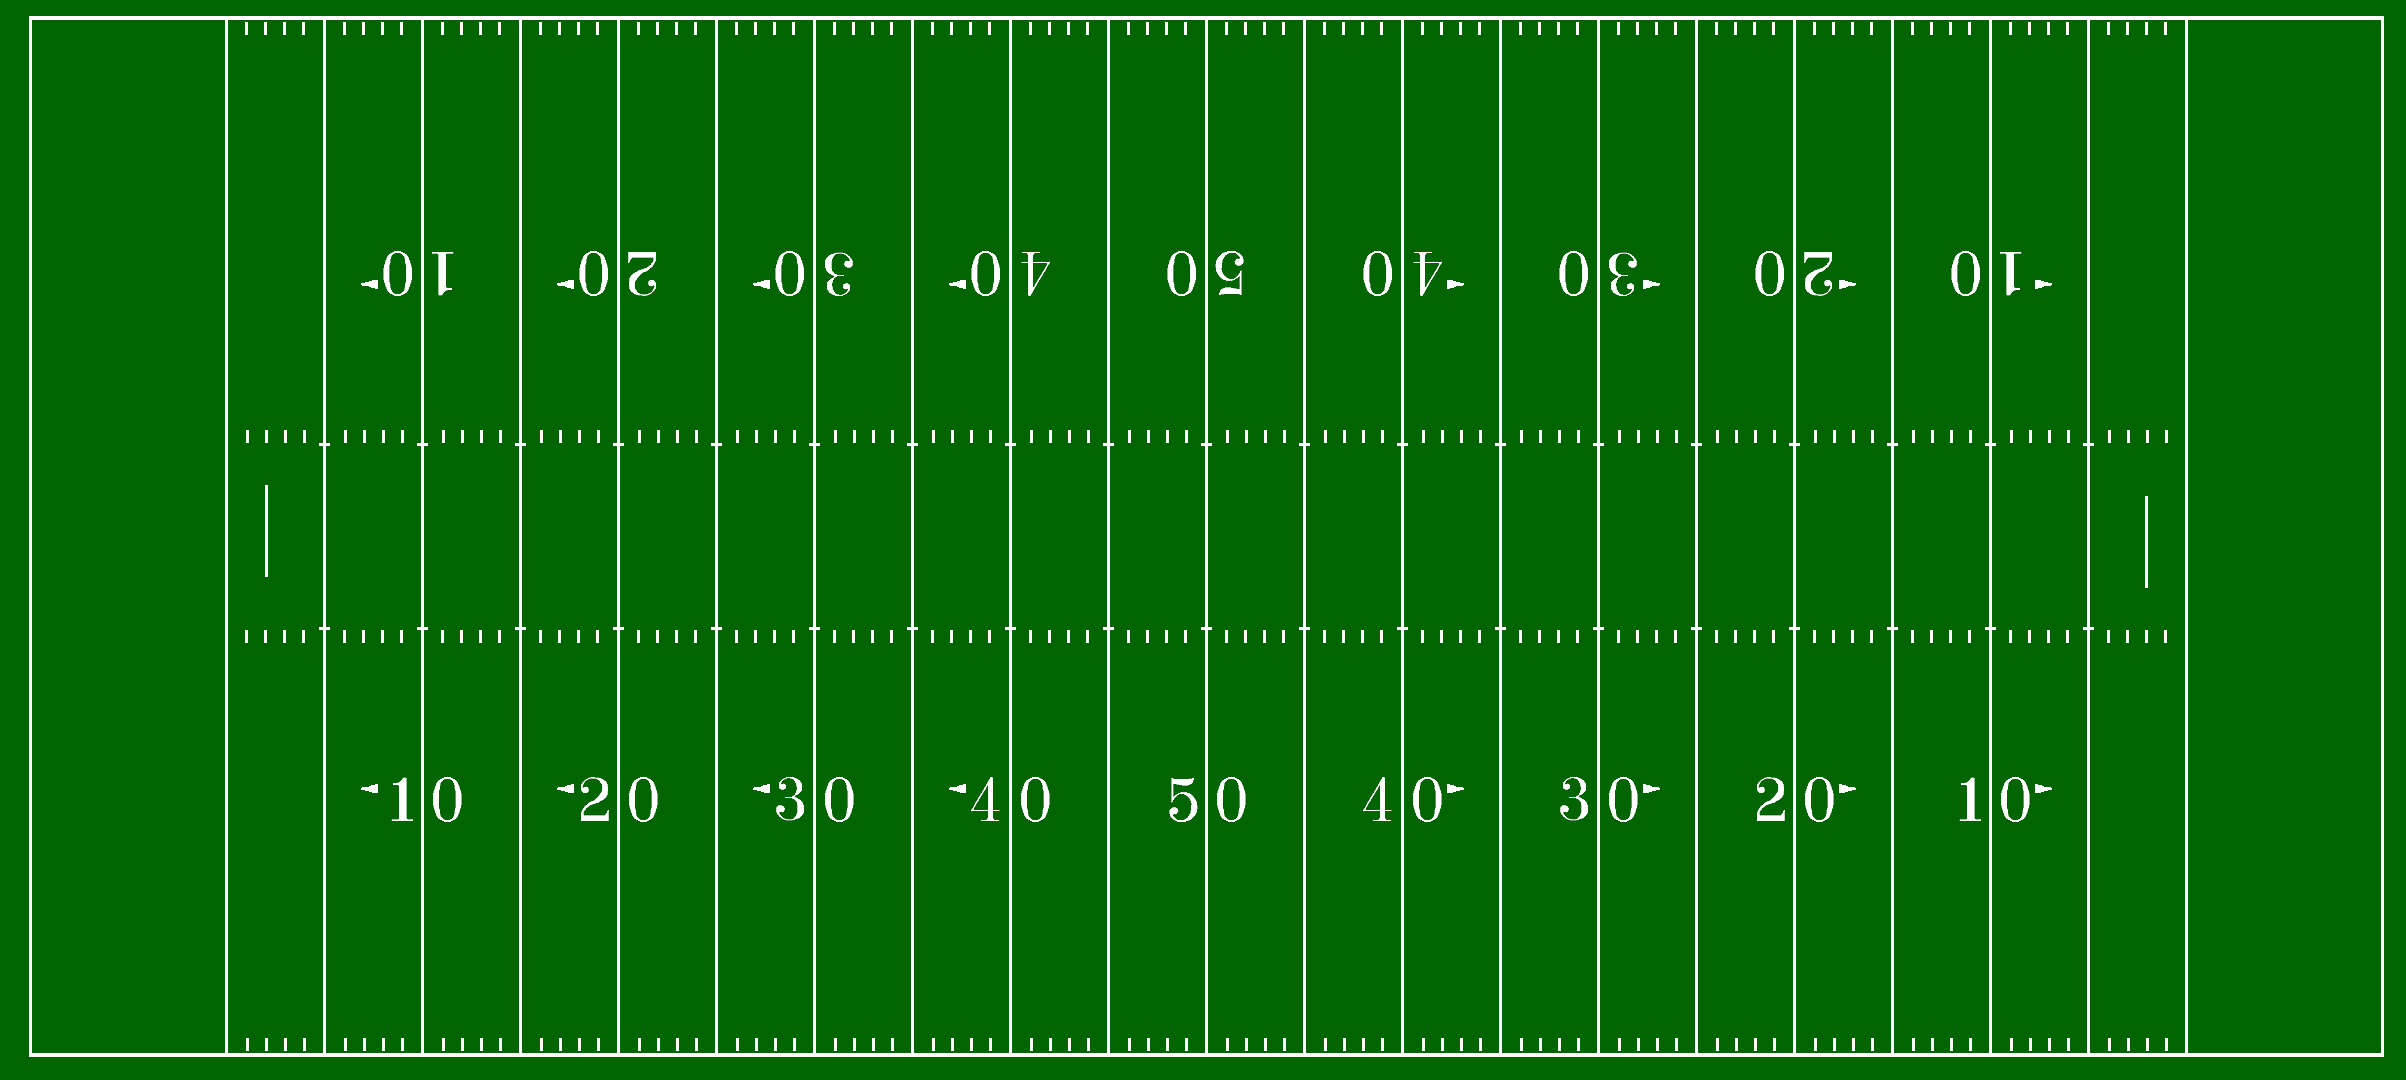 clipart of football field - photo #26